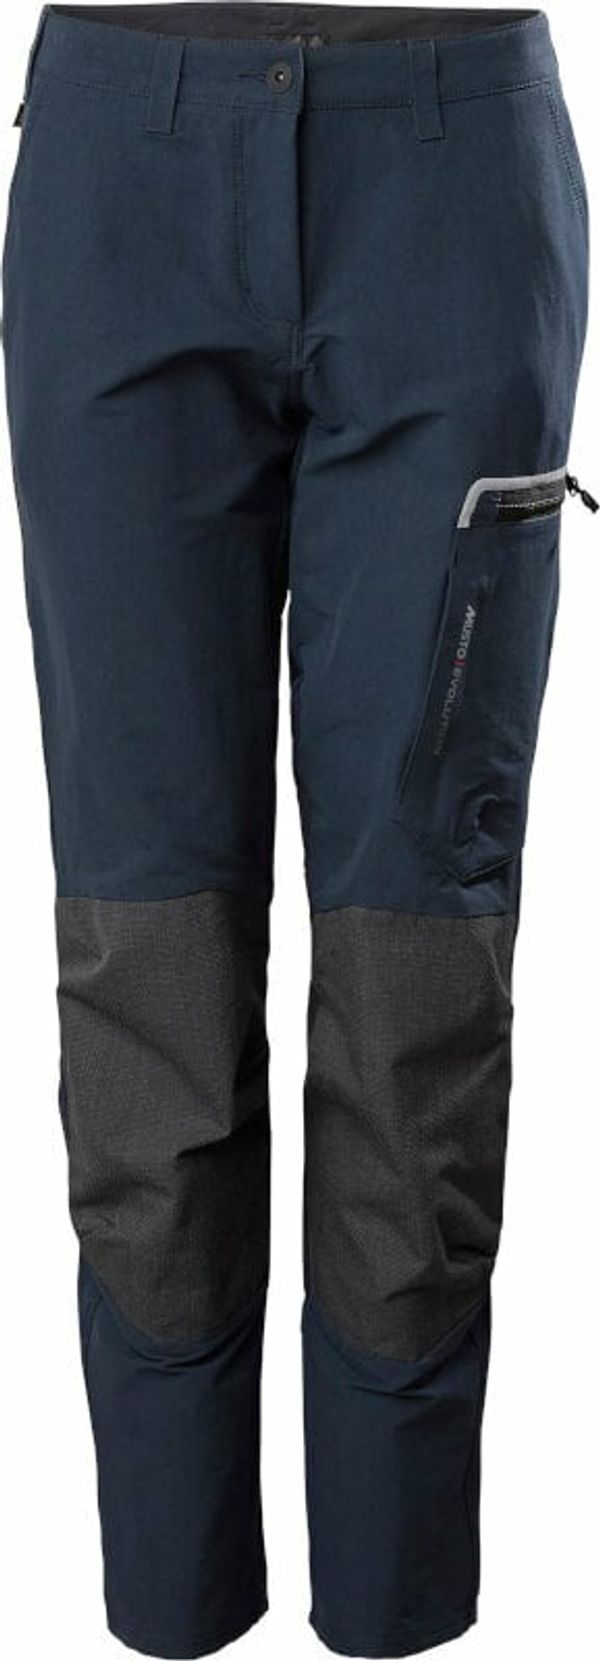 Musto Musto Evolution Performance 2.0 FW True Navy 10/R Trousers